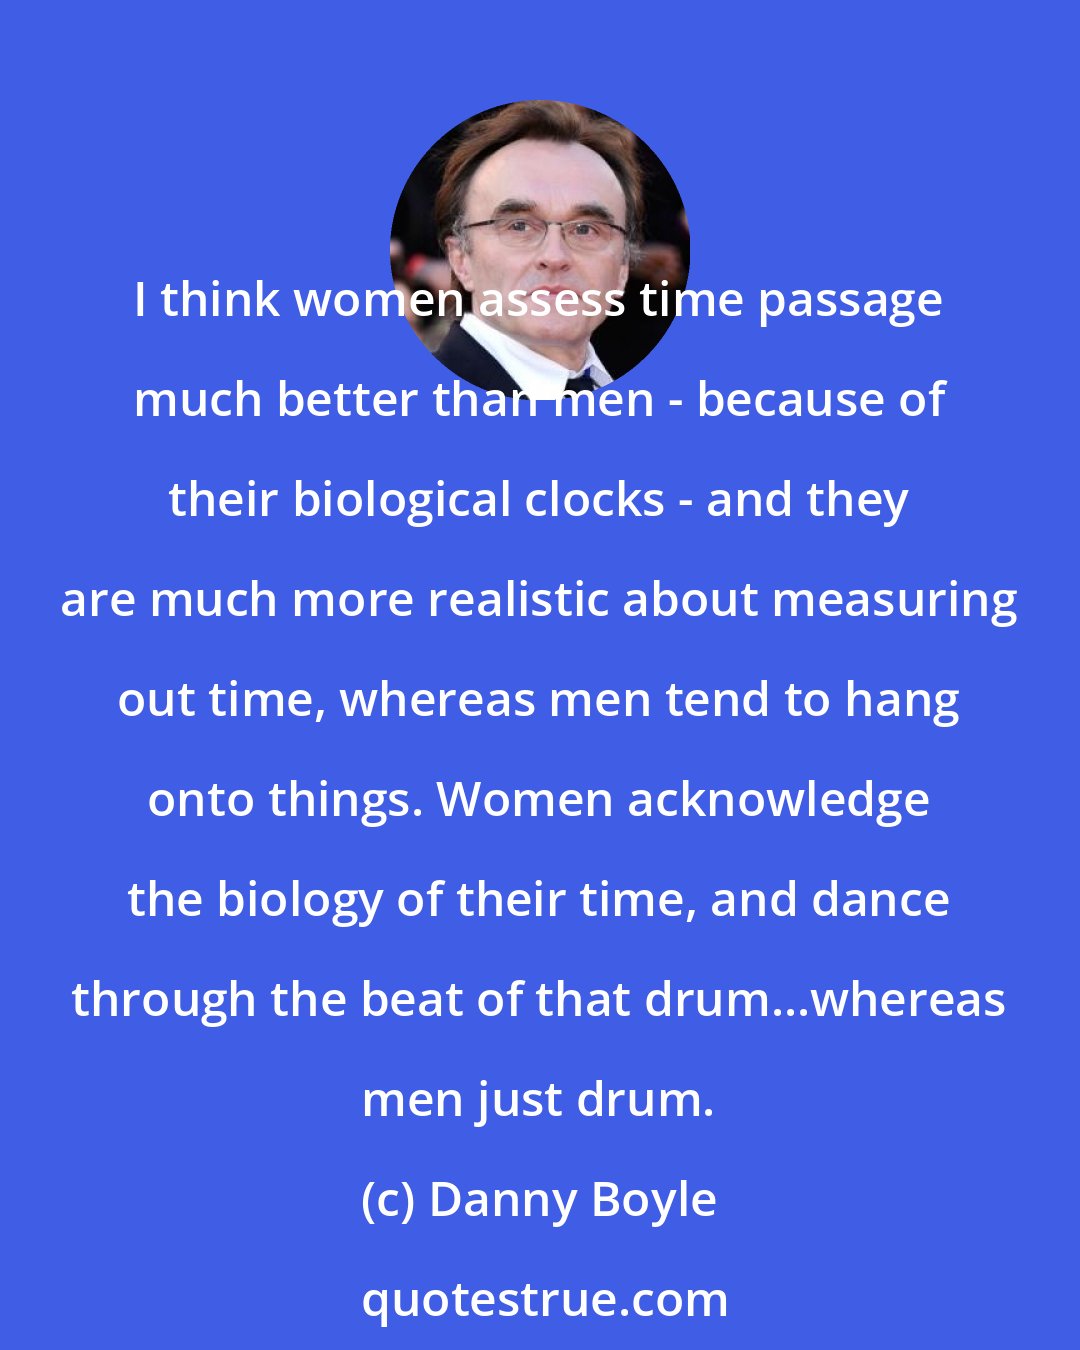 Danny Boyle: I think women assess time passage much better than men - because of their biological clocks - and they are much more realistic about measuring out time, whereas men tend to hang onto things. Women acknowledge the biology of their time, and dance through the beat of that drum...whereas men just drum.